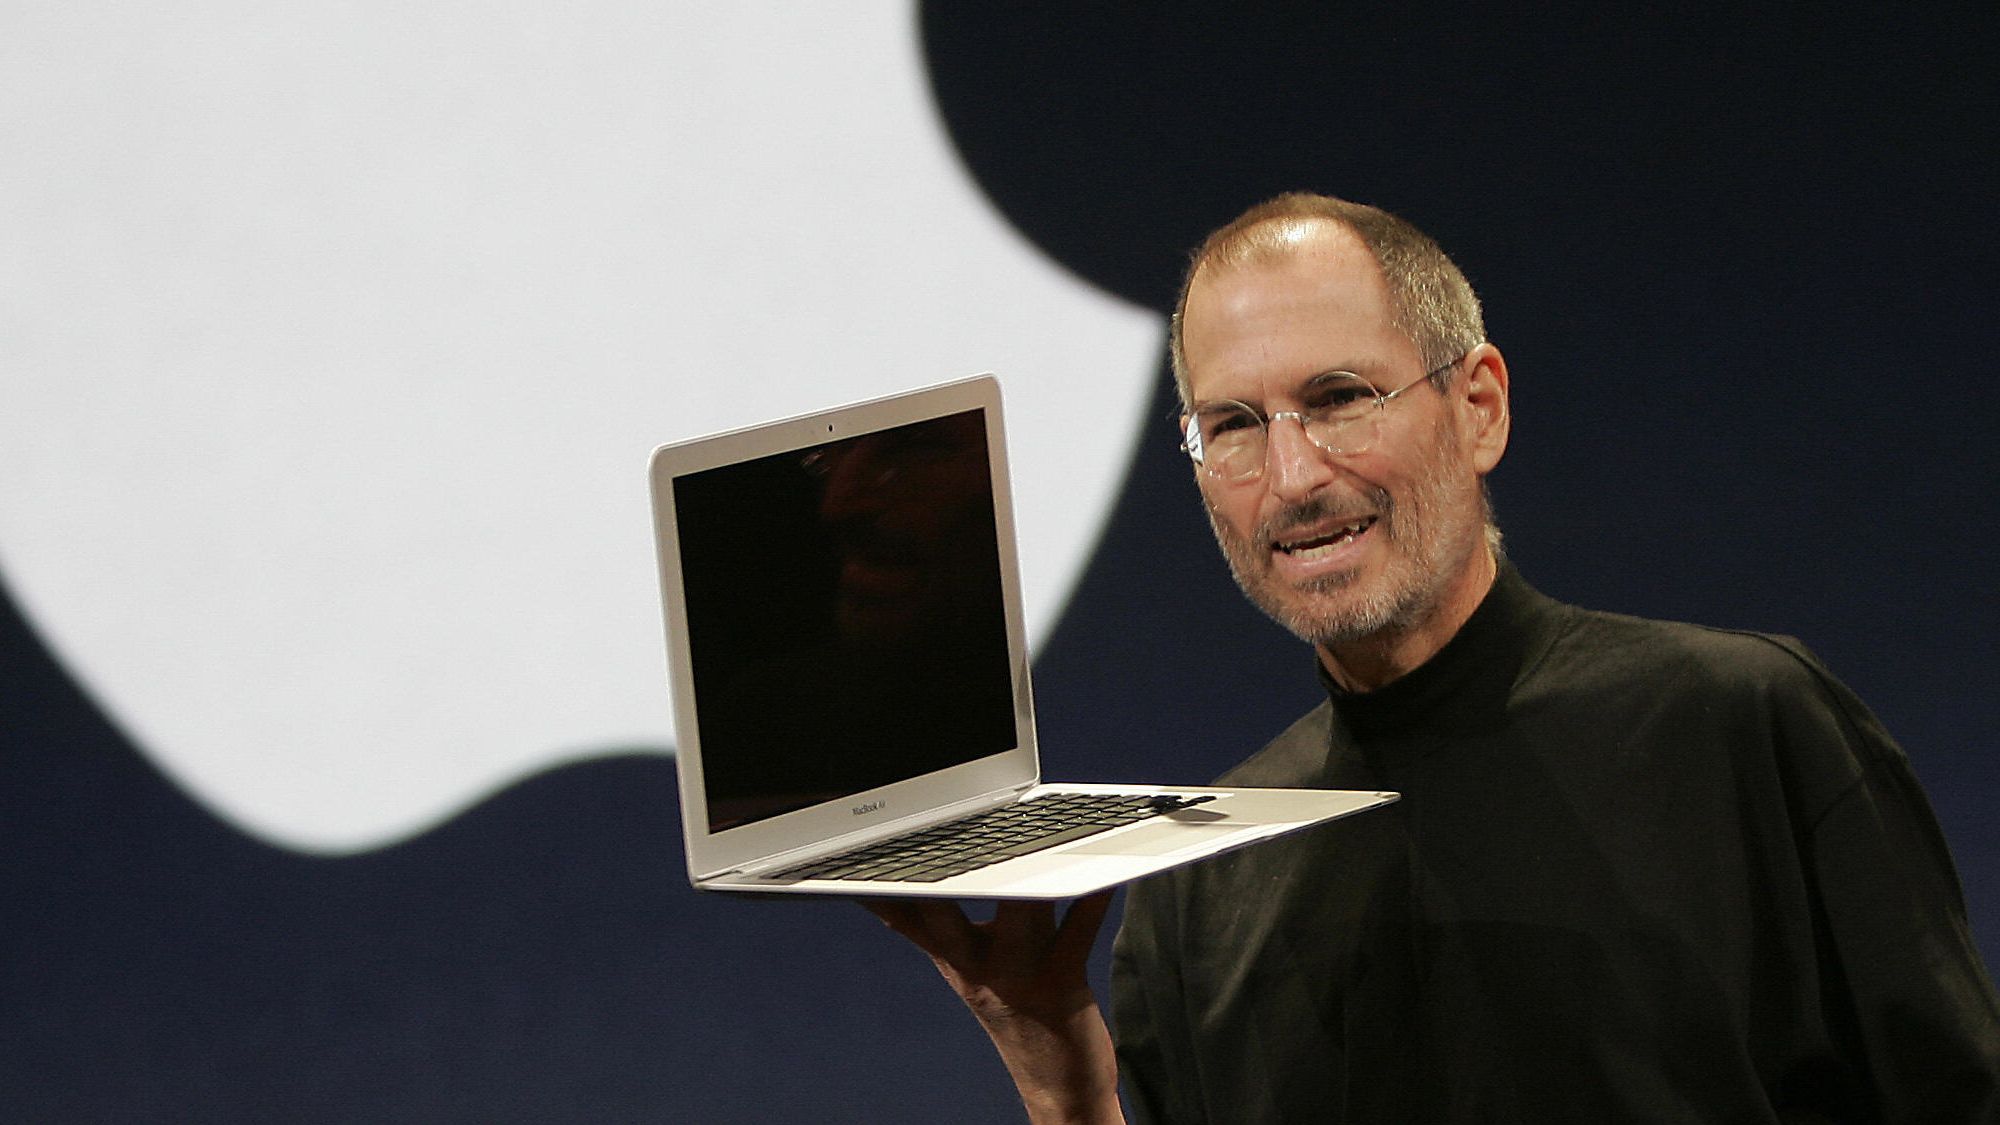 After Steve Jobs, it became difficult to think of a computer as anything other than sleek and balanced, Glenn Lowry says.